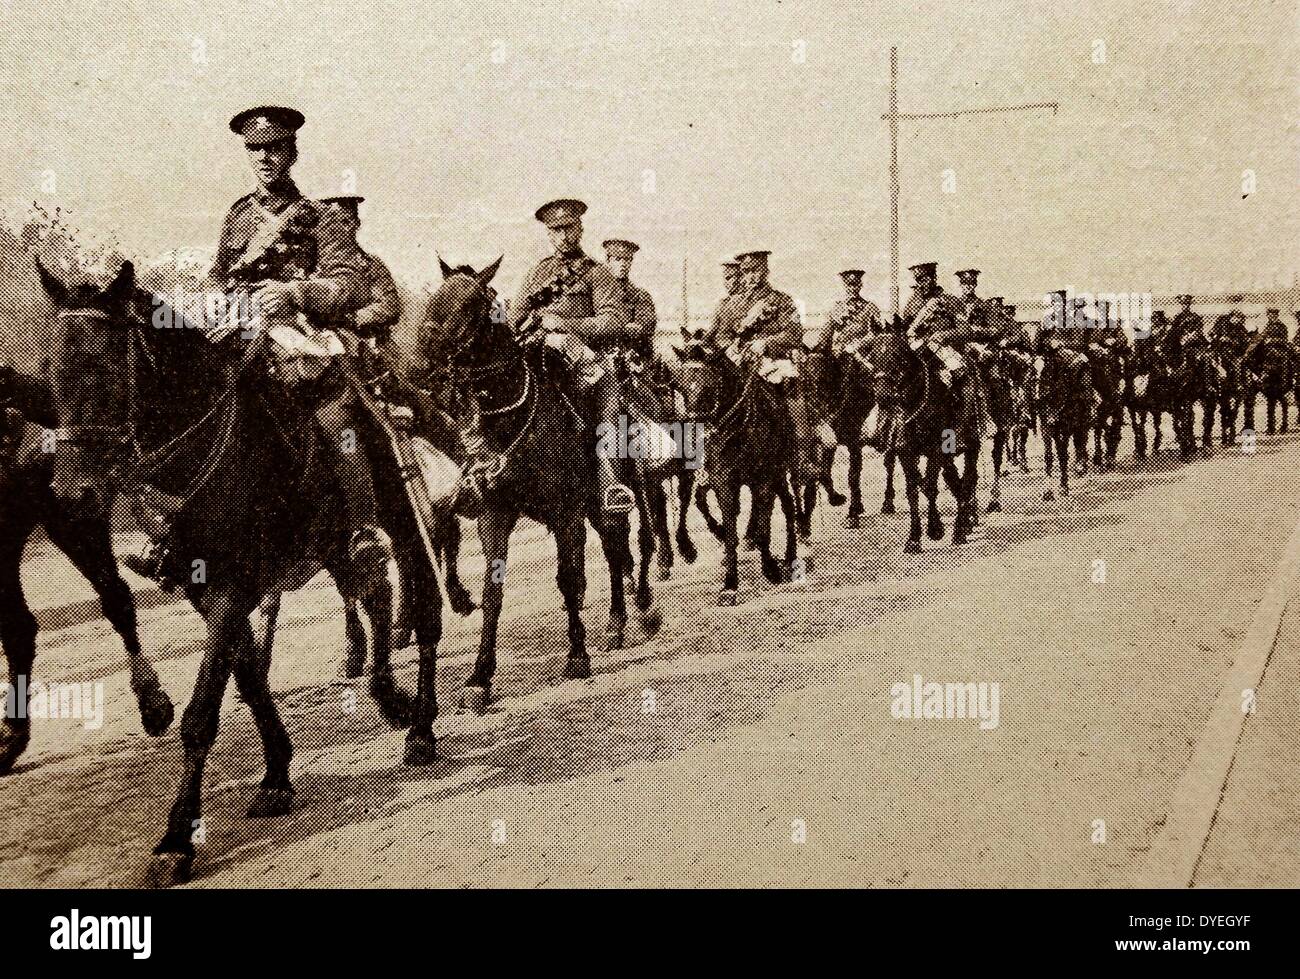 The British Expeditionary Force arrives in Belgium ahead of the battle of the Mons. The Battle of Mons was the first major action of the British Expeditionary Force (BEF) in the First World War. August 1914 Stock Photo